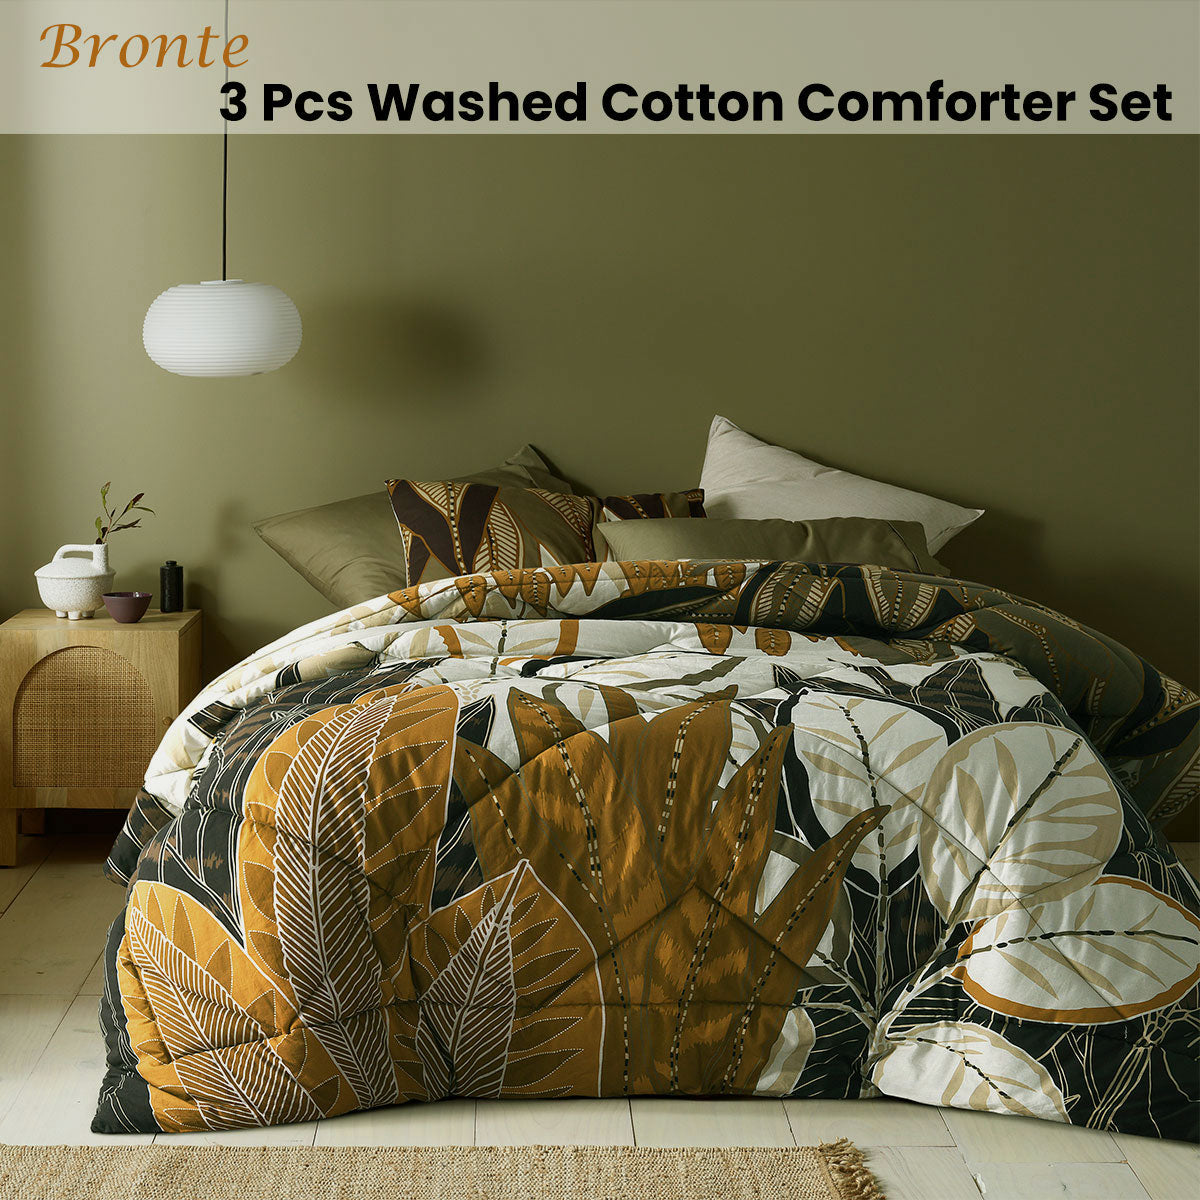 Accessorize Bronte Washed Cotton Printed 3 Piece Comforter Set King